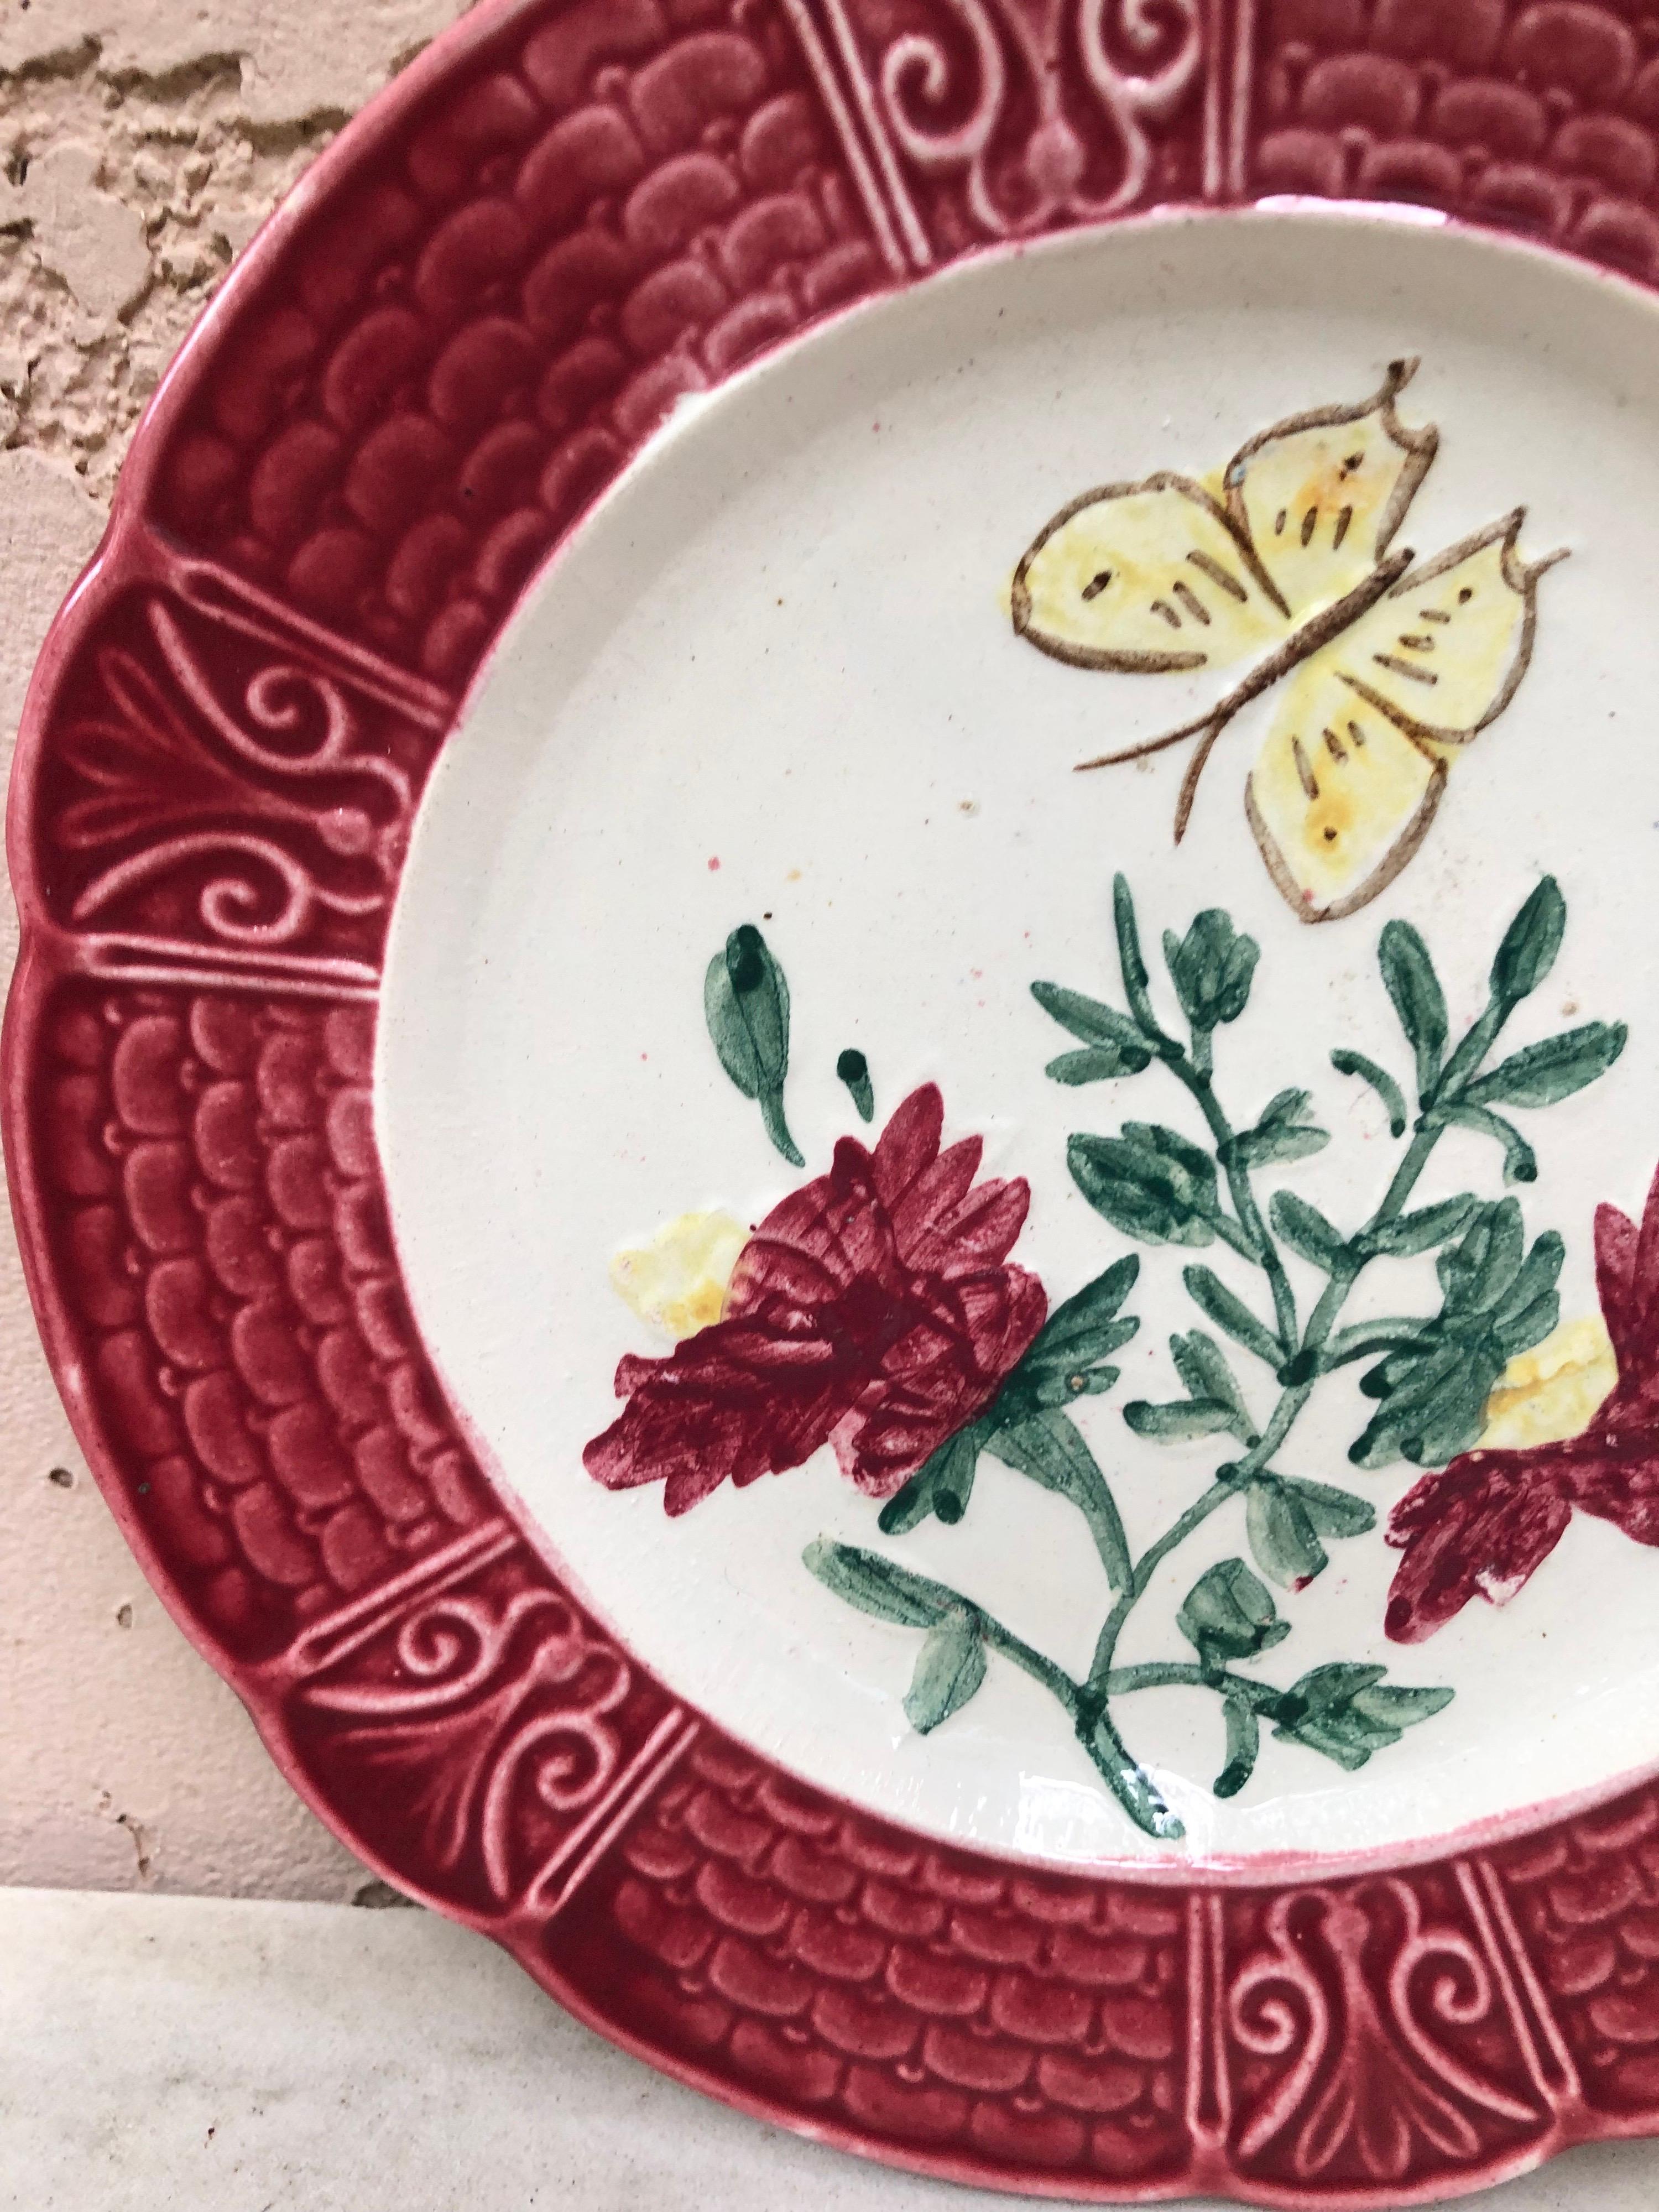 French majolica plate with flowers & butterfly, Circa 1900.